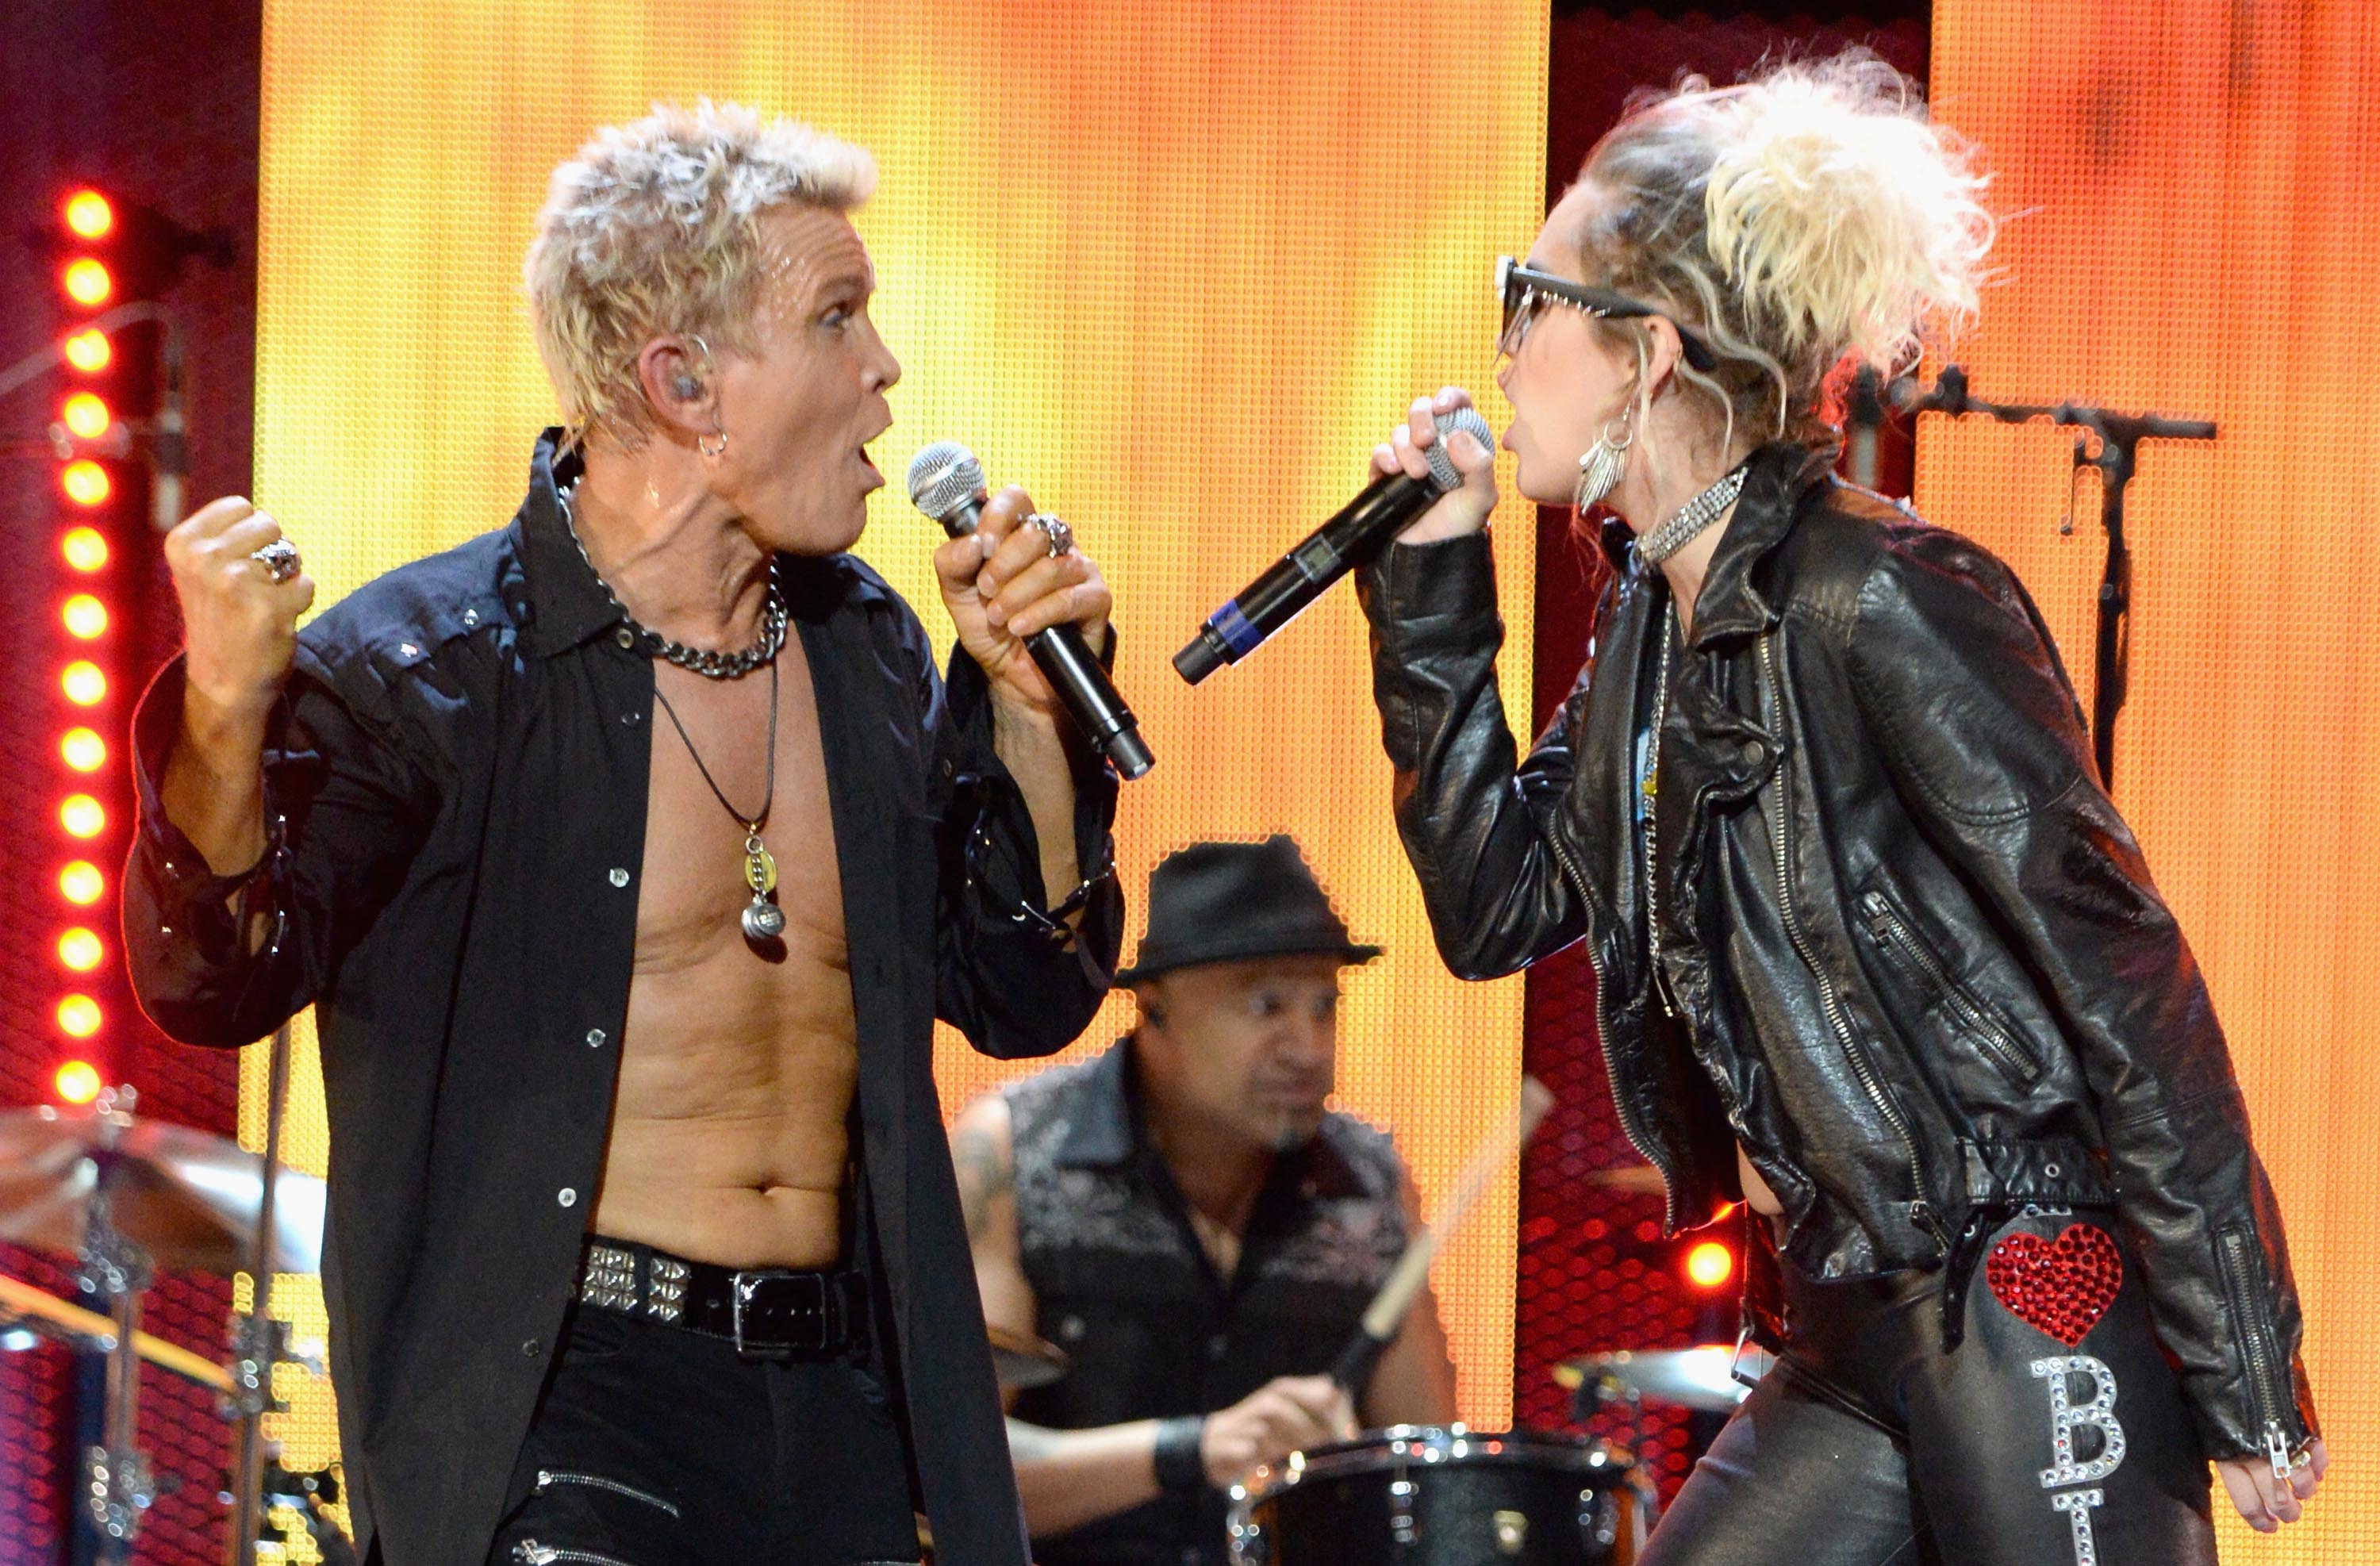 Miley Cyrus duet with Billy Idol at the 2016 iHeartRadio Music Festival